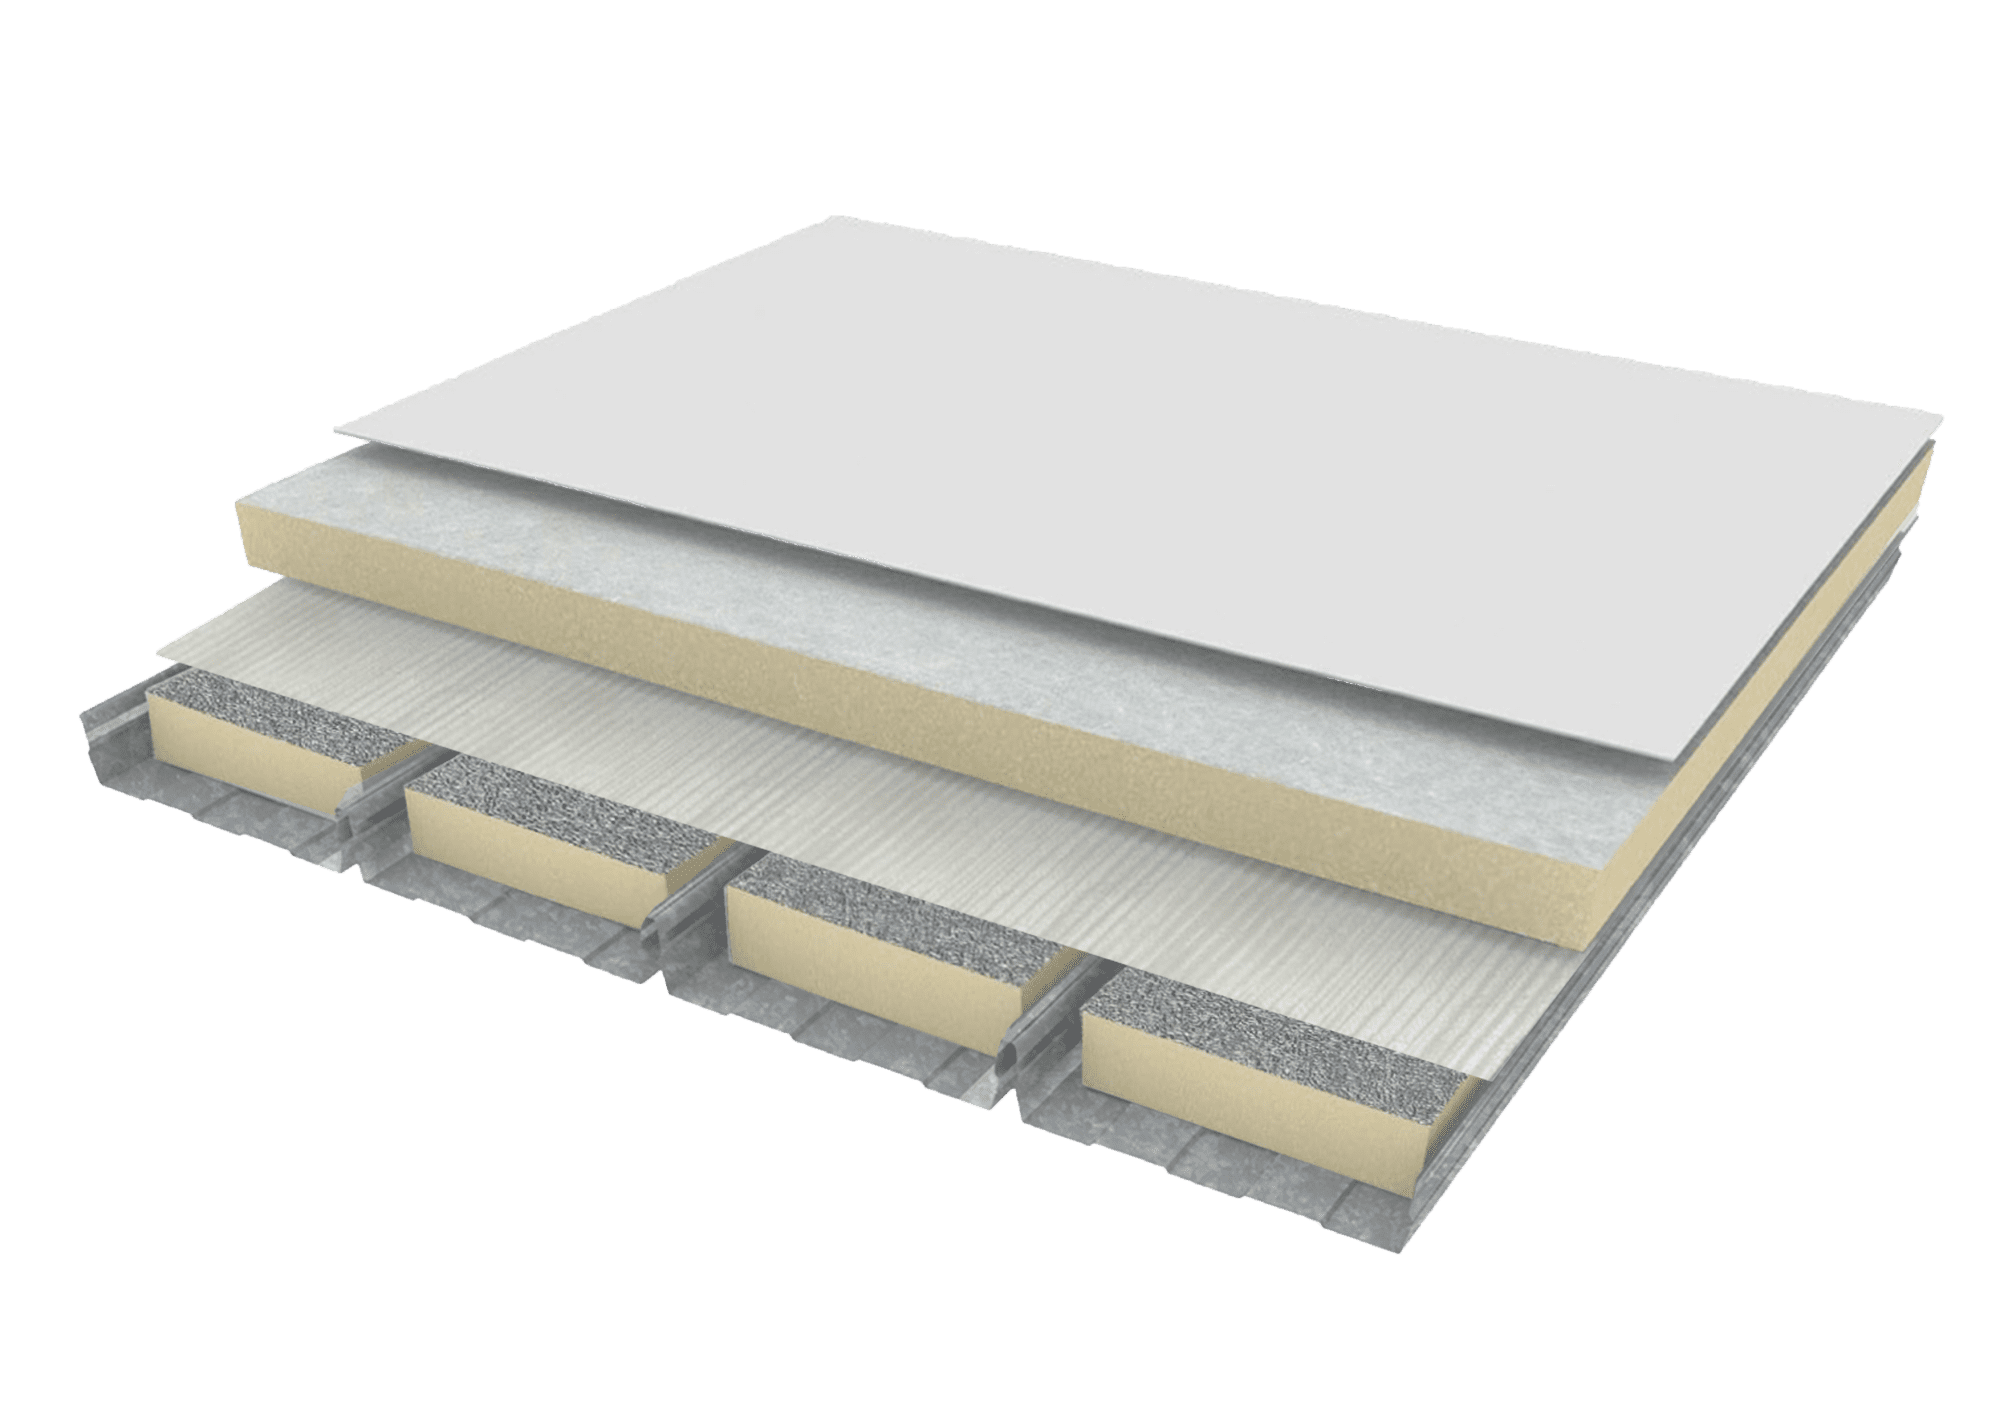 Recover warm roof systems